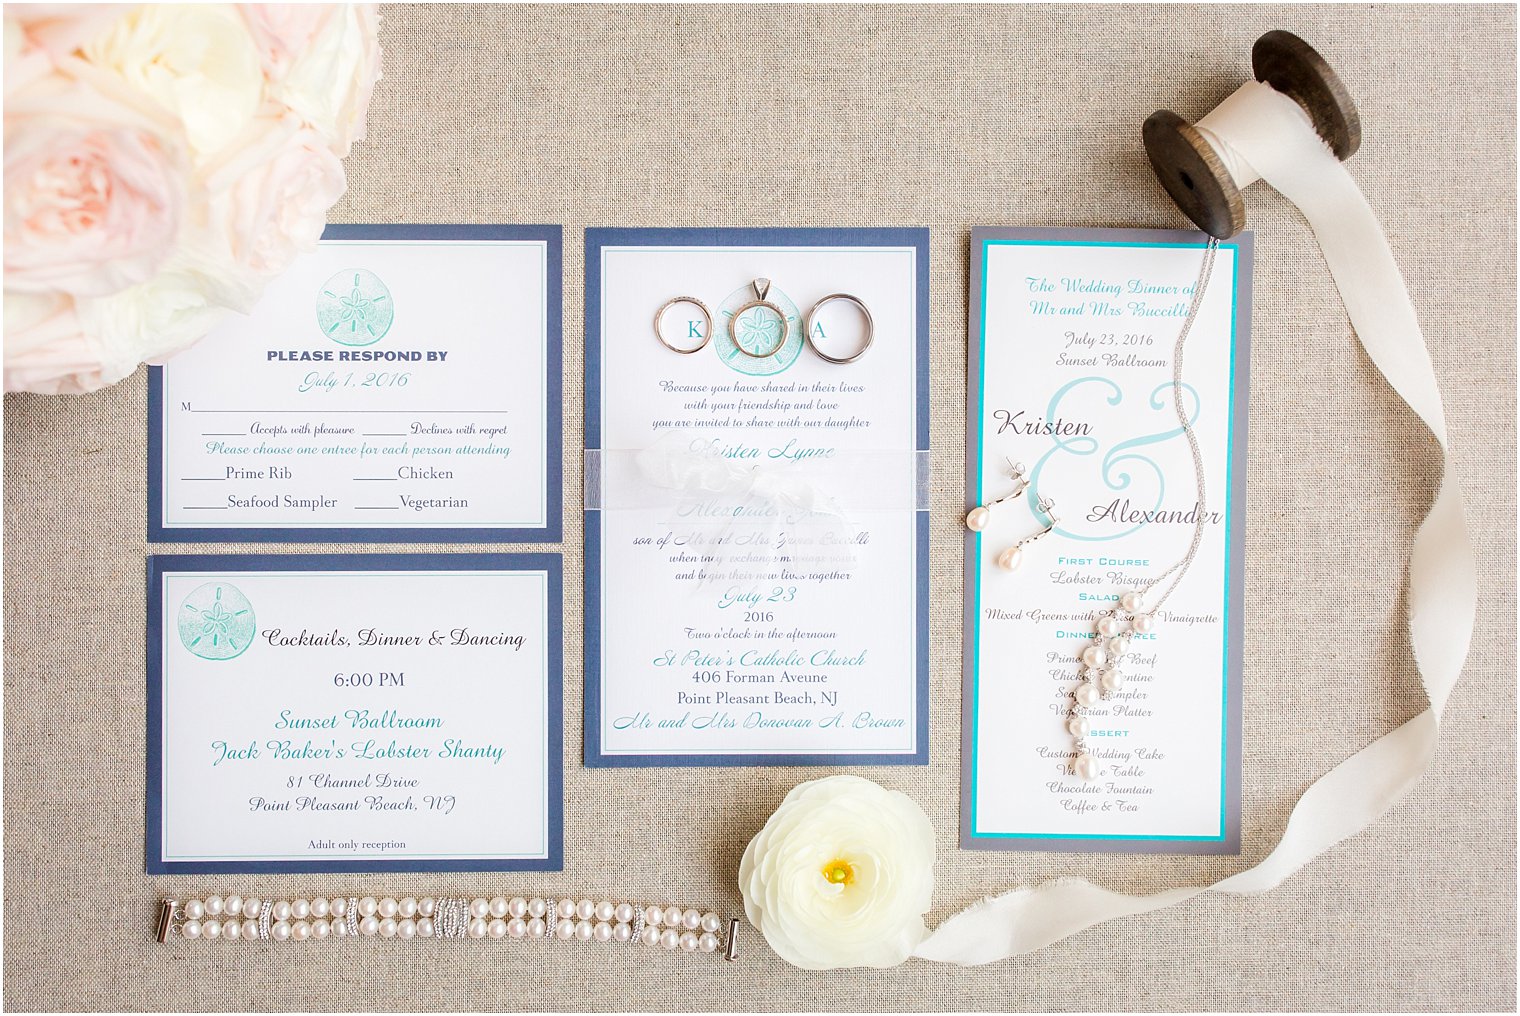 Teal and blue wedding invitations by Vista Print